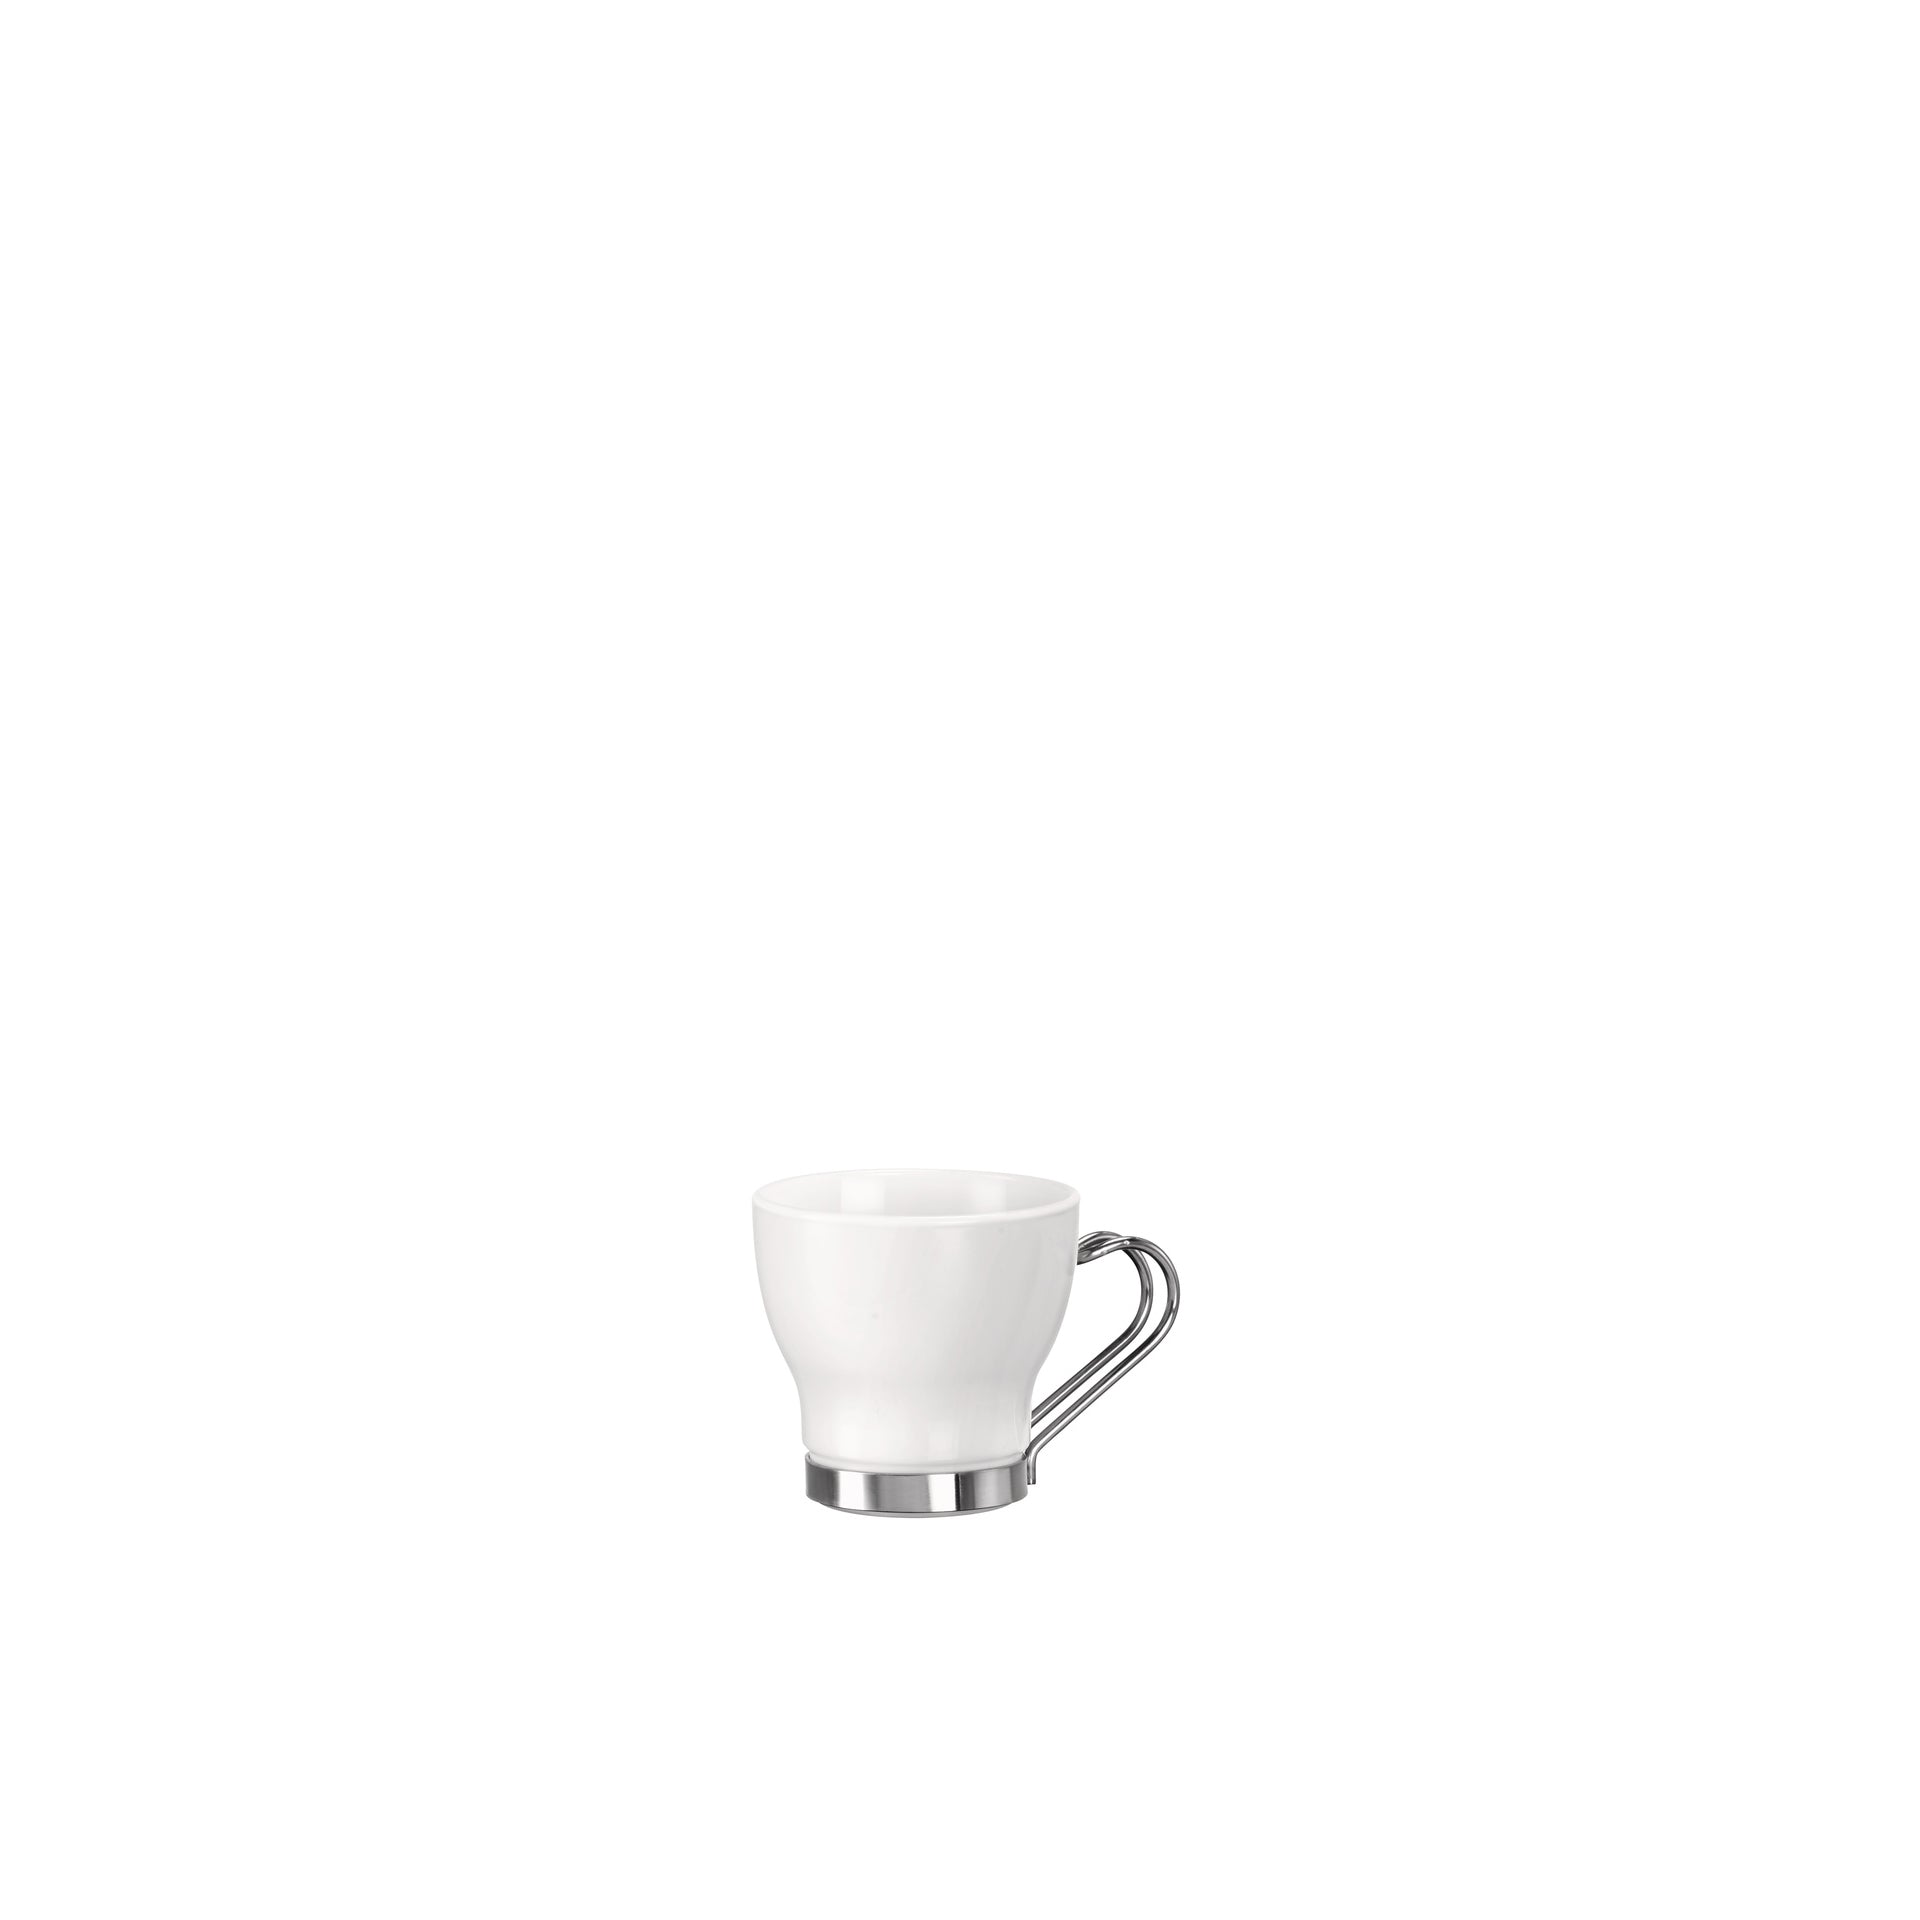 Aromateca 3.5 oz. Opal Glass Espresso Cup with Stainless Steel Handle (Set of 4)